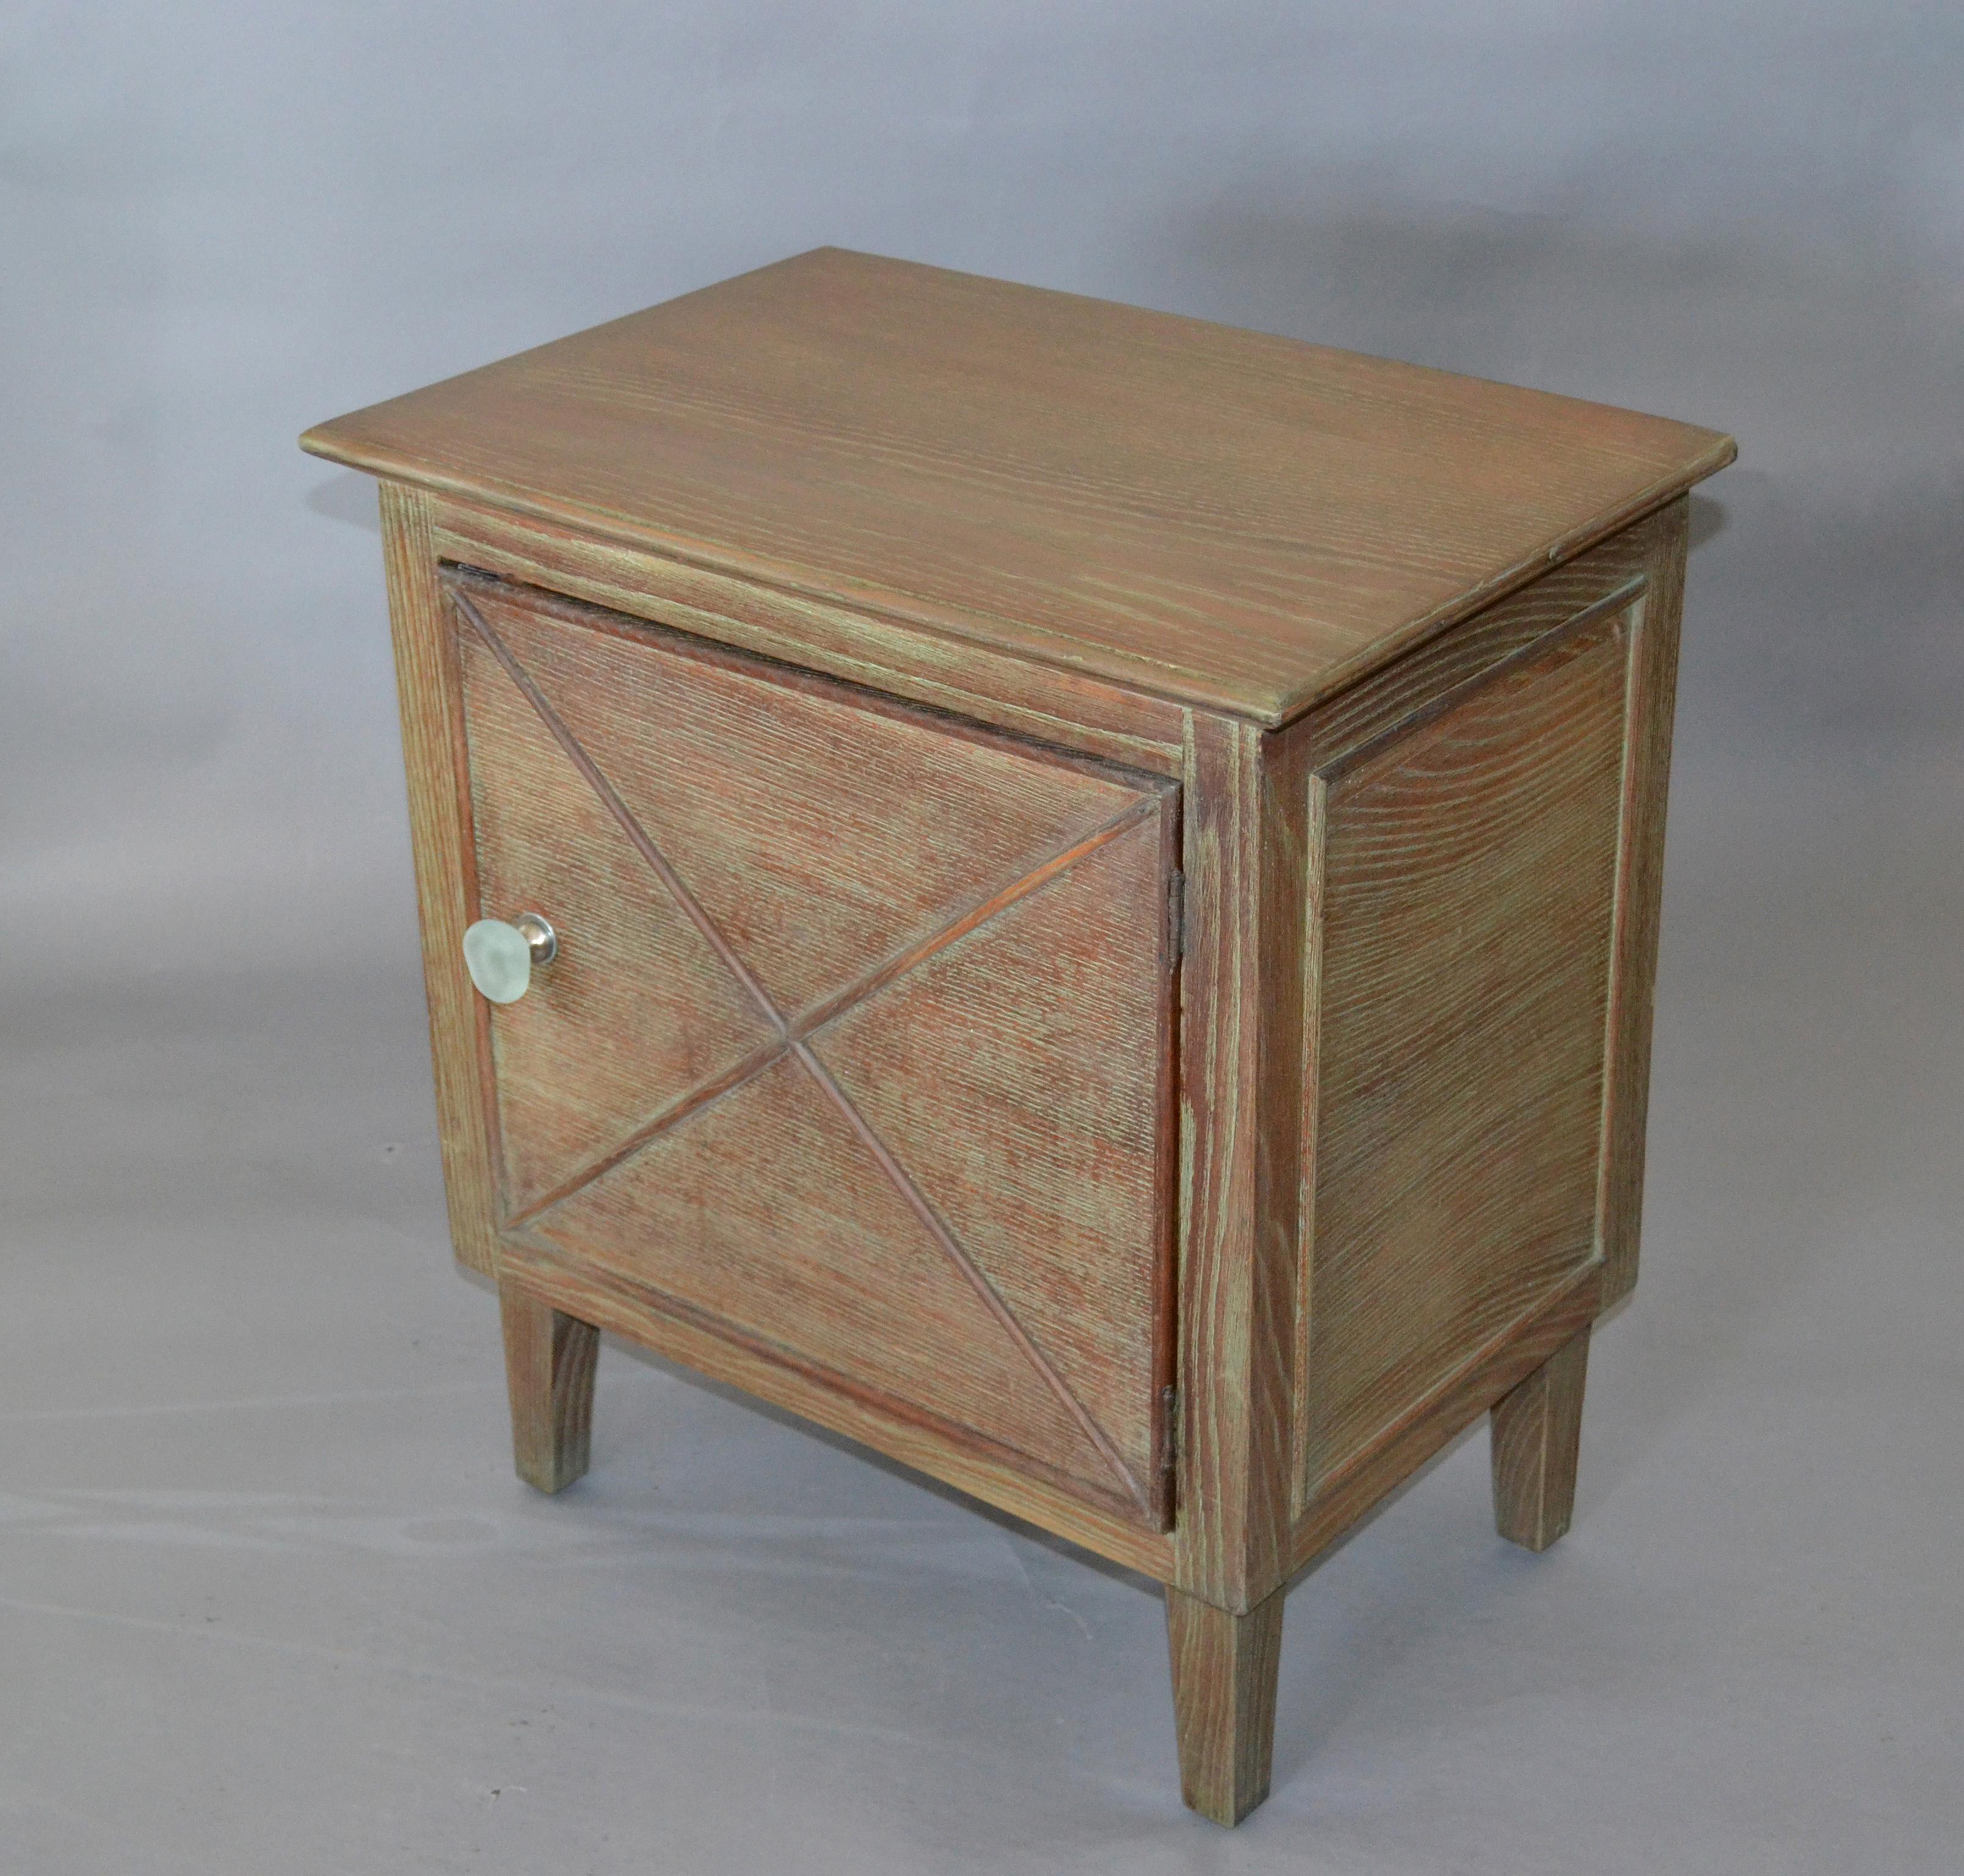 Two Mid-Century Modern Oak Nightstands Bedside Tables Cerused Finish Resin Knobs In Good Condition For Sale In Miami, FL